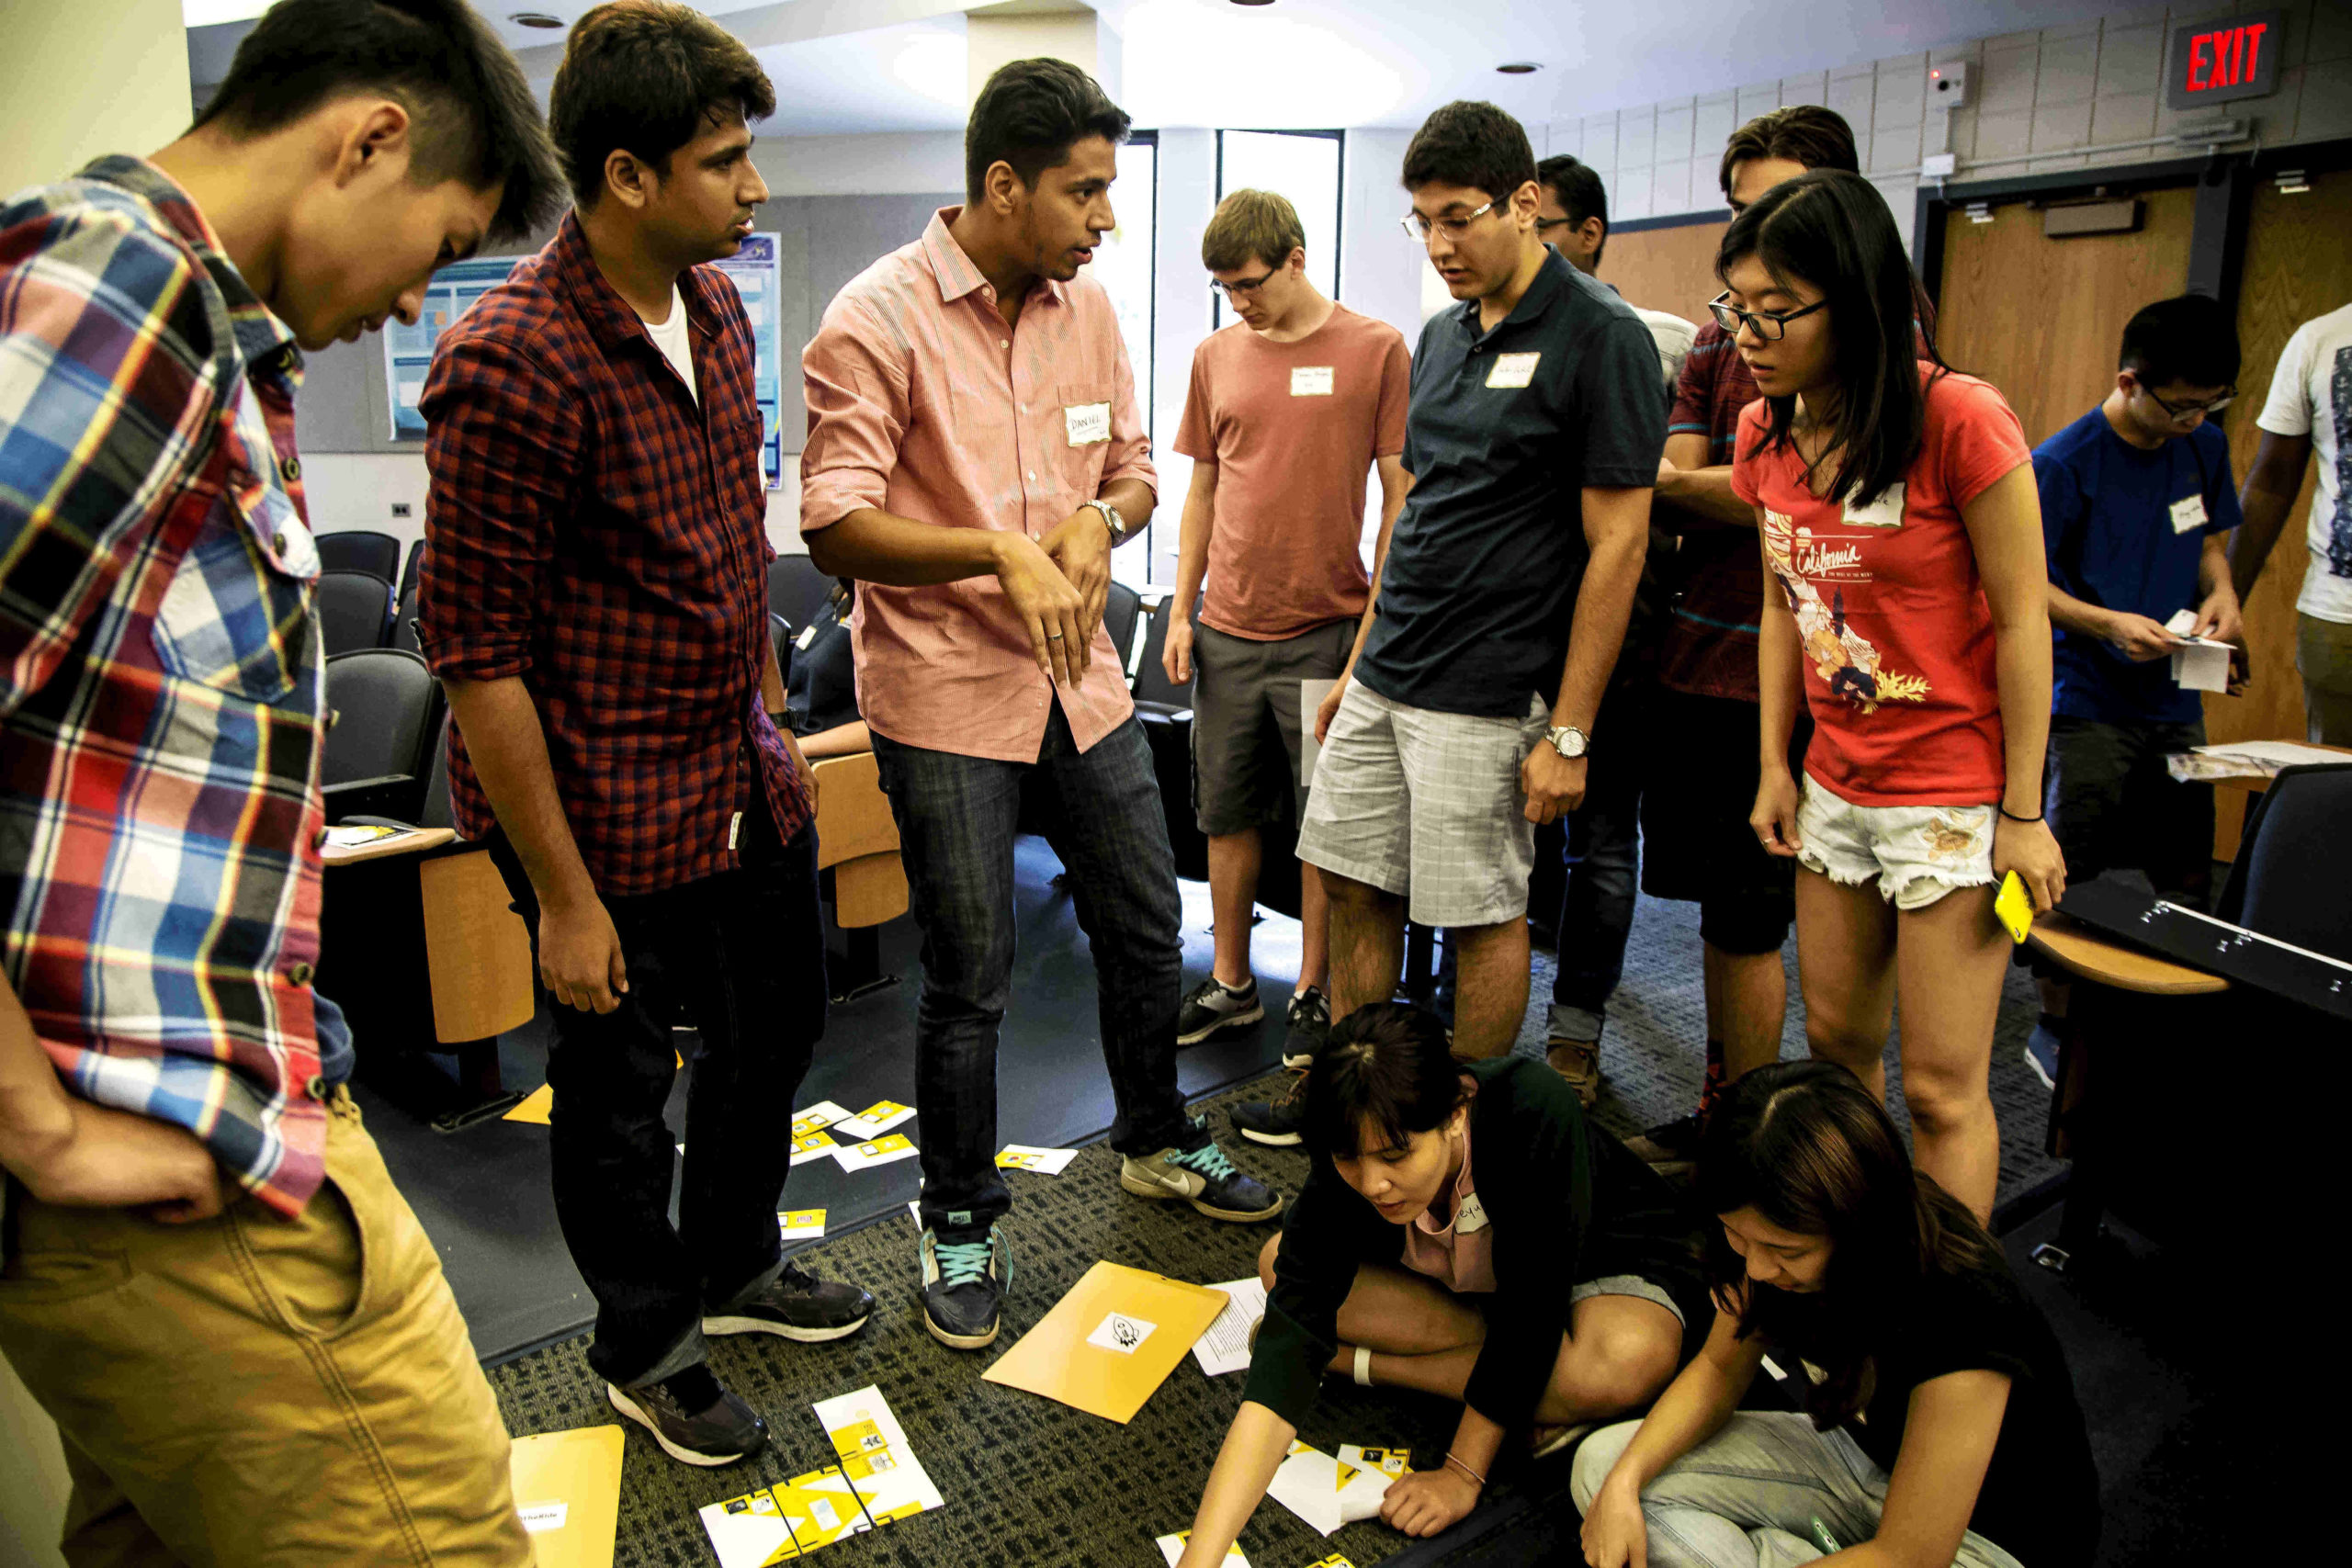 Students standing and kneeling to work on a team-building activity